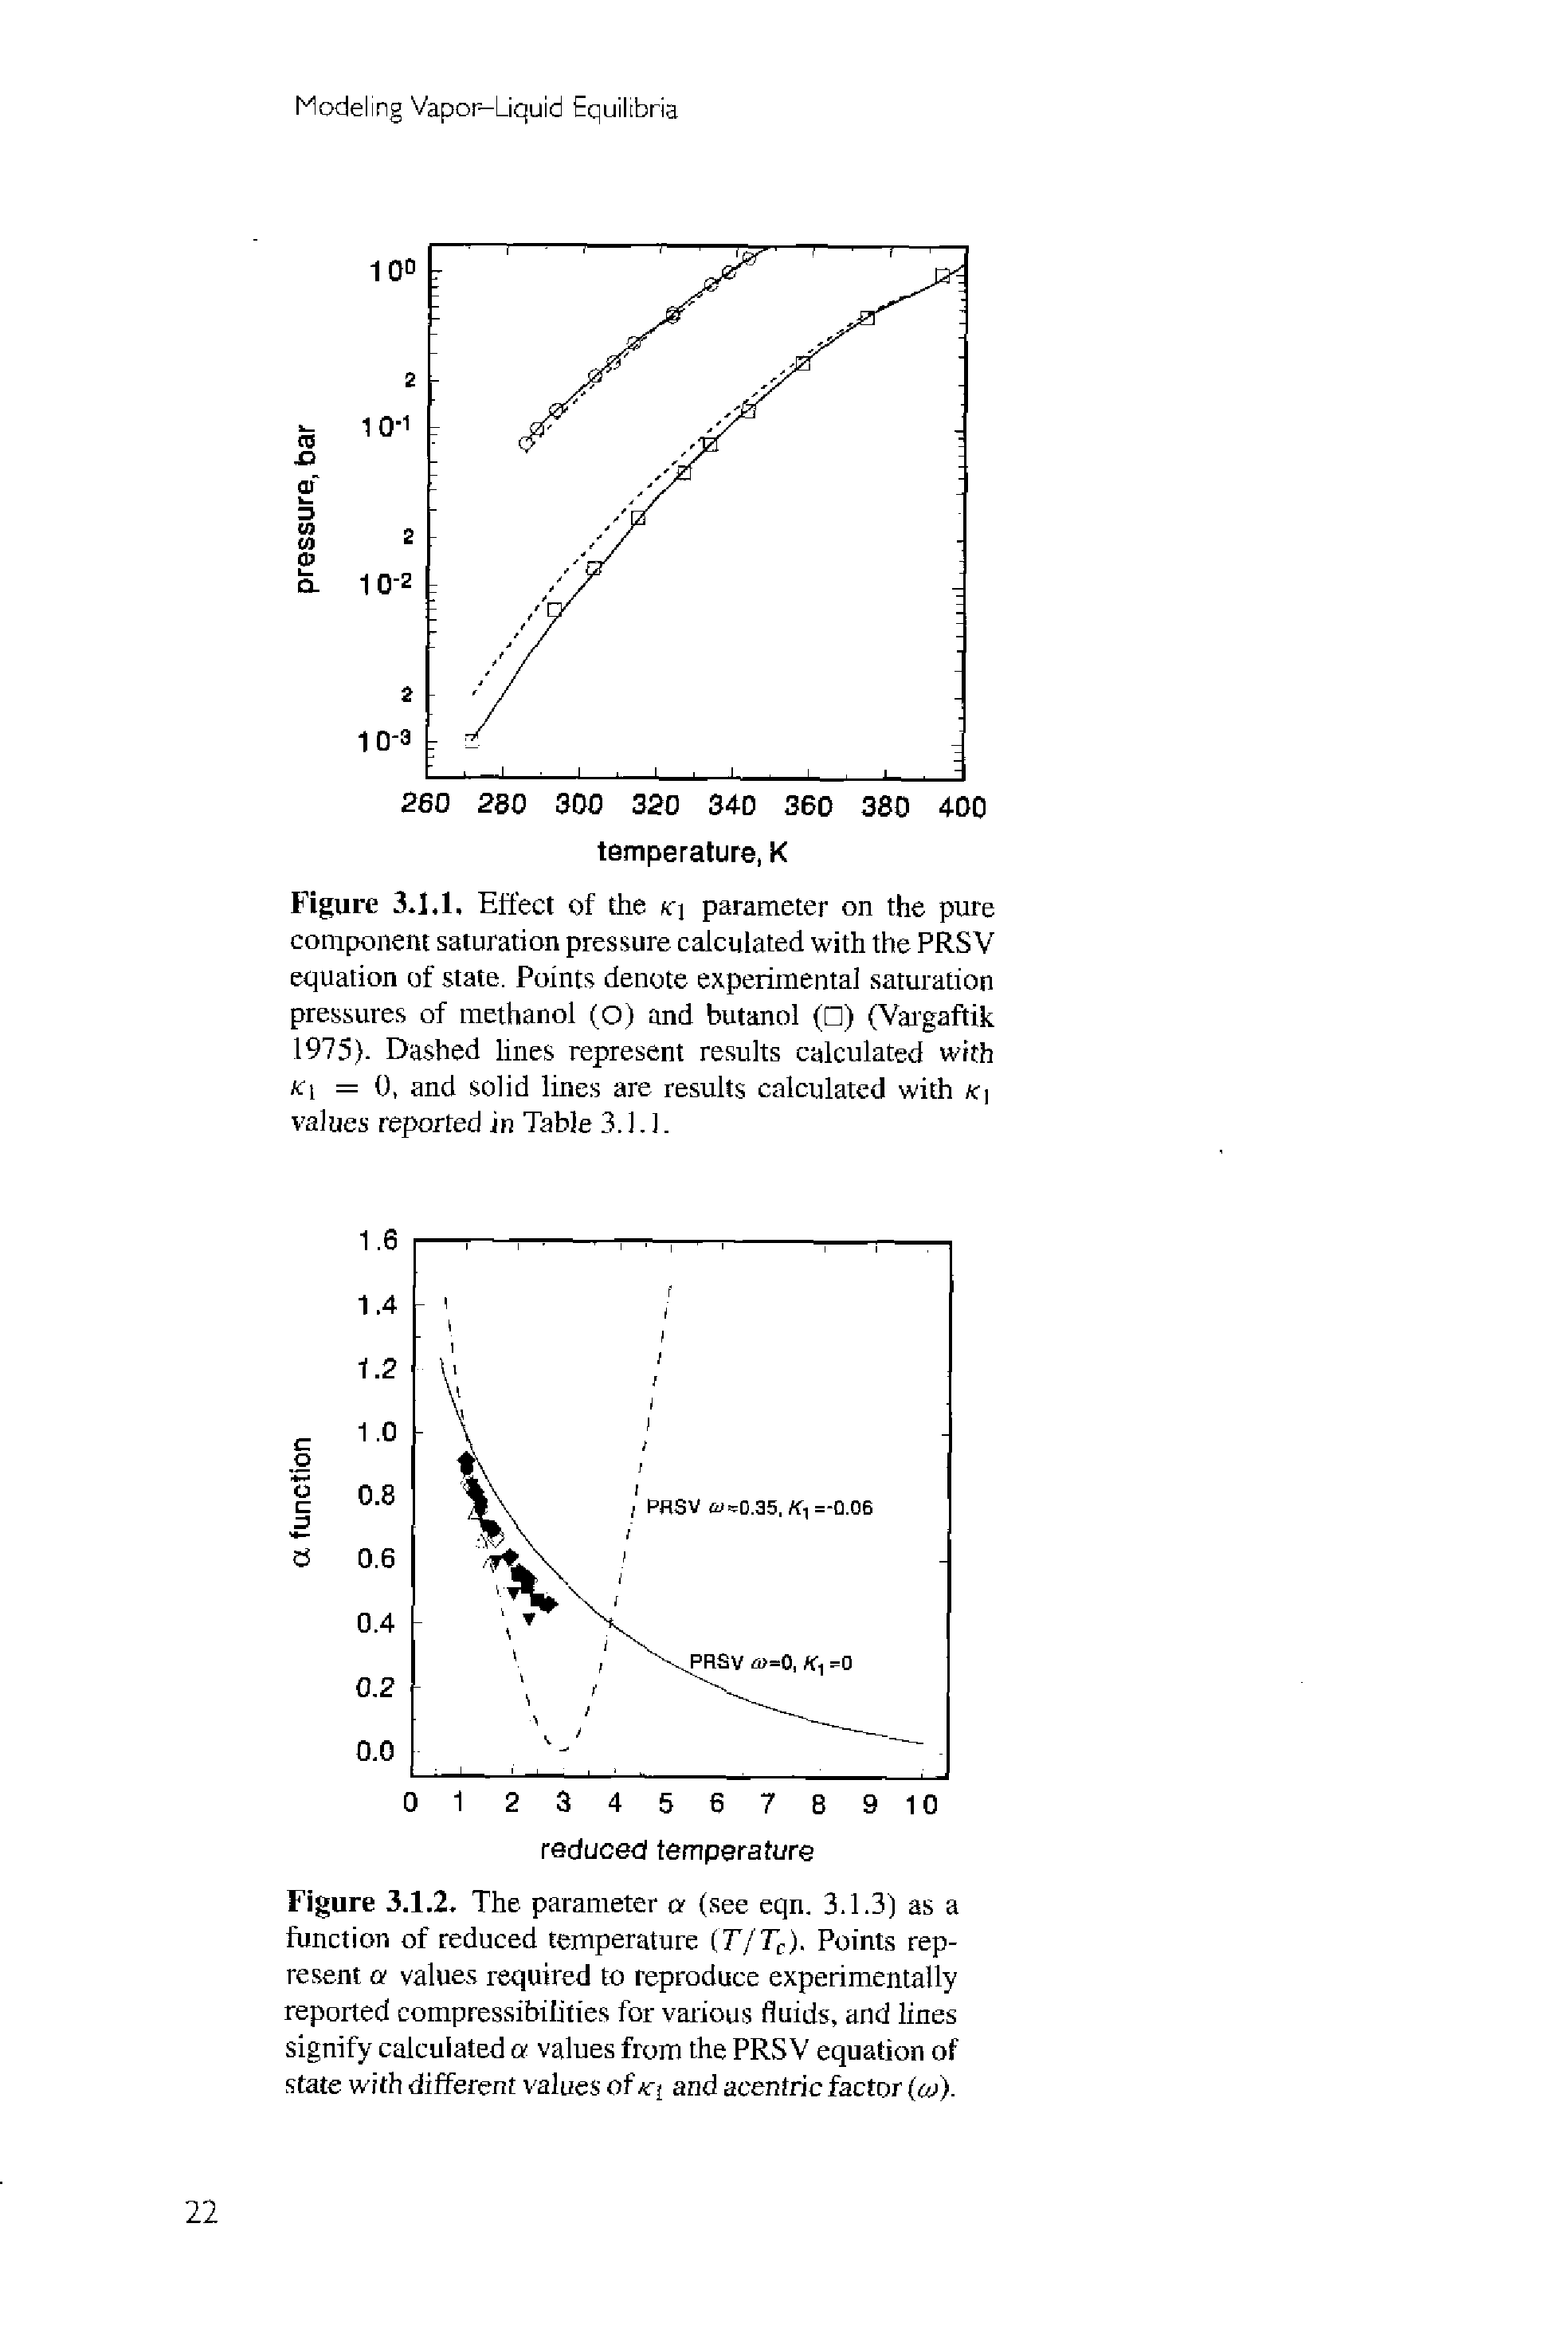 Figure 3J.1. Effect of the k] parameter on the pure component saturation pressure calculated with the PRSV equation of state. Points denote experimental saturation pressures of methanol (O) and butanol ( ) (Vargaftik 1975. Dashed lines represent results calculated with tfi =0, and solid lines are results calculated with /C values reported in Table 3.1.1.